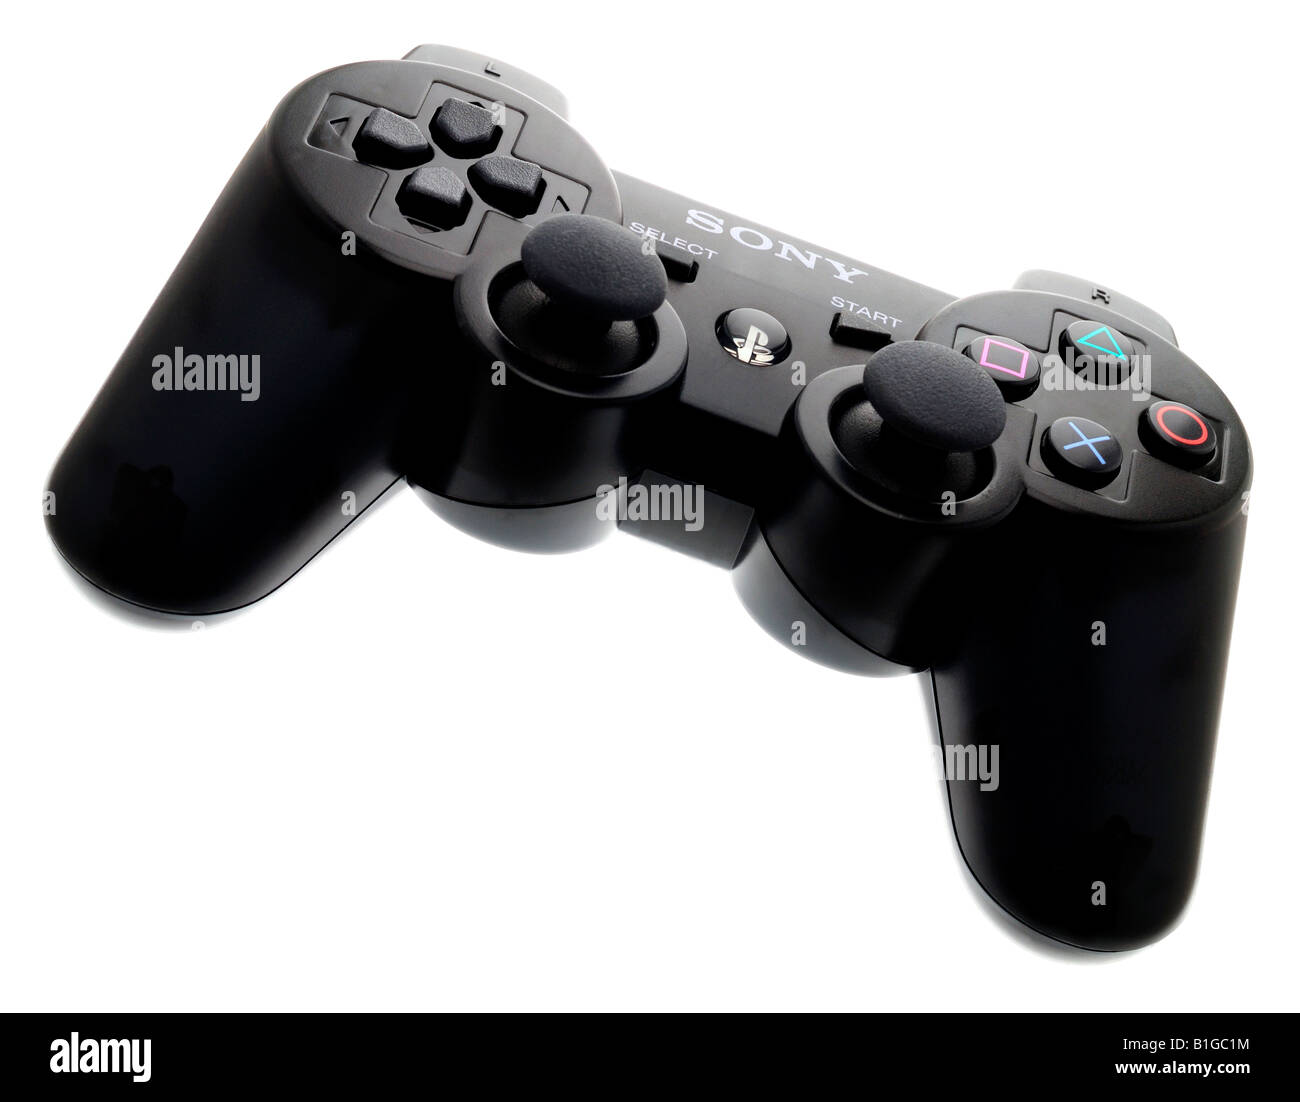 Play Station Wireless PS3 Hand Controller Stock Photo